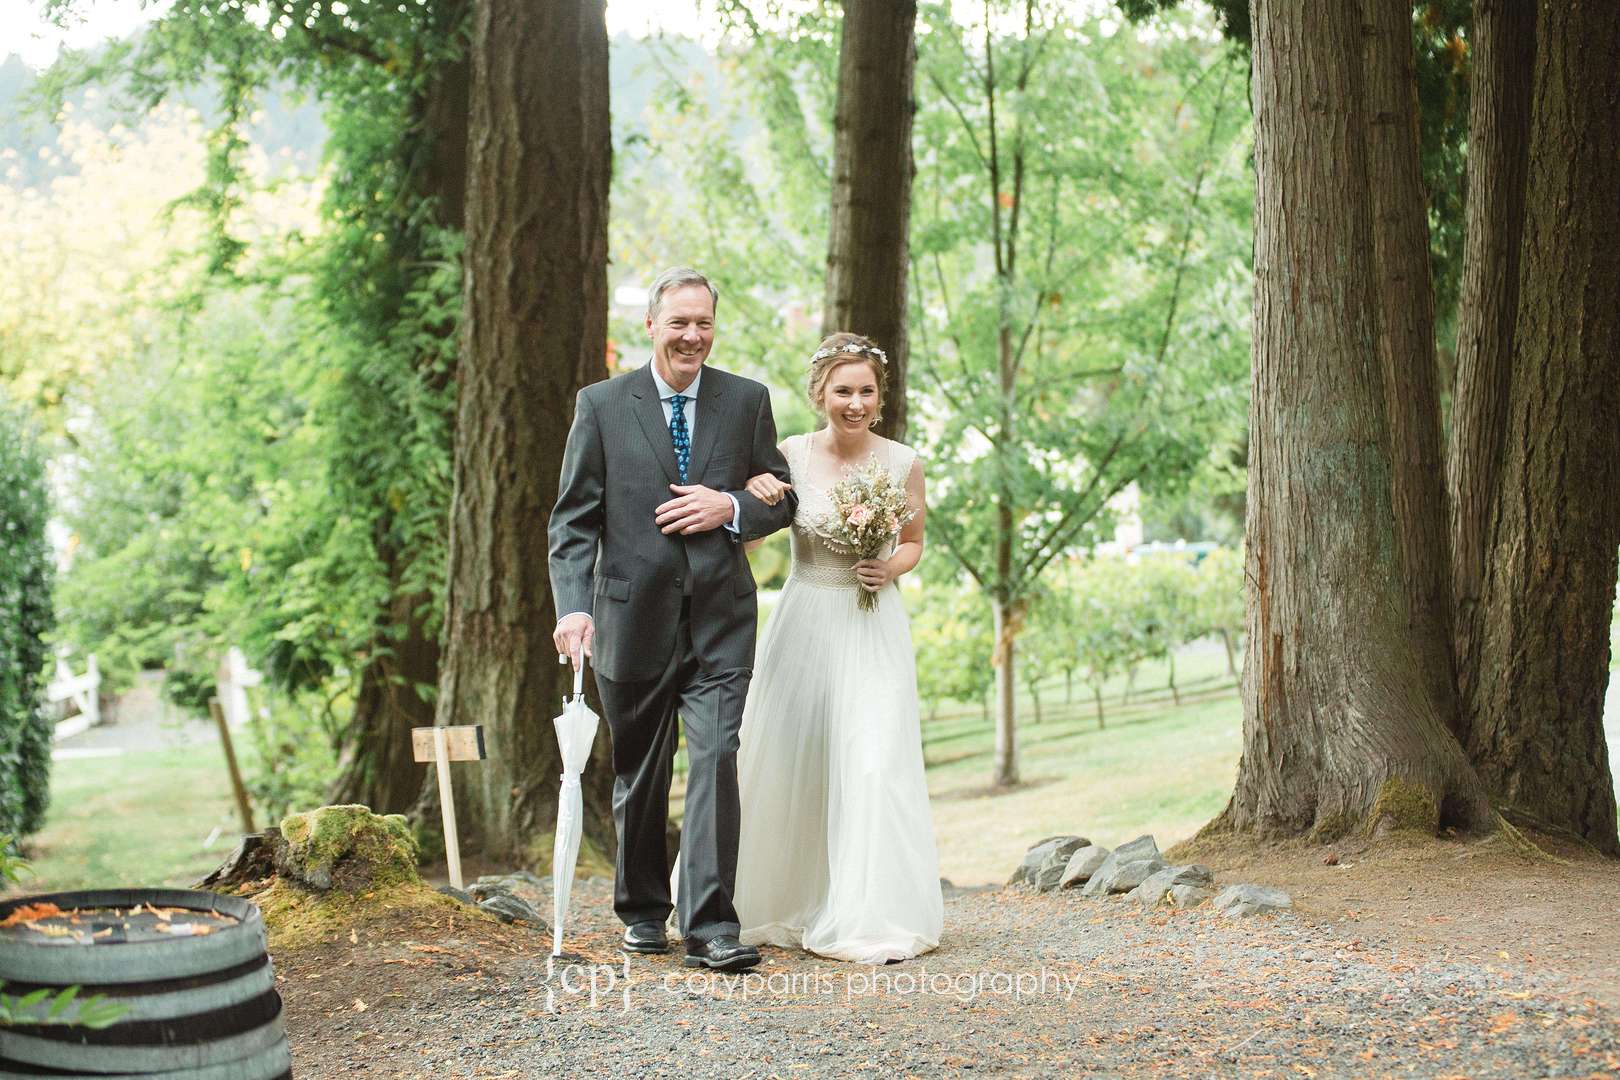 Bride walking with her dad through the trees